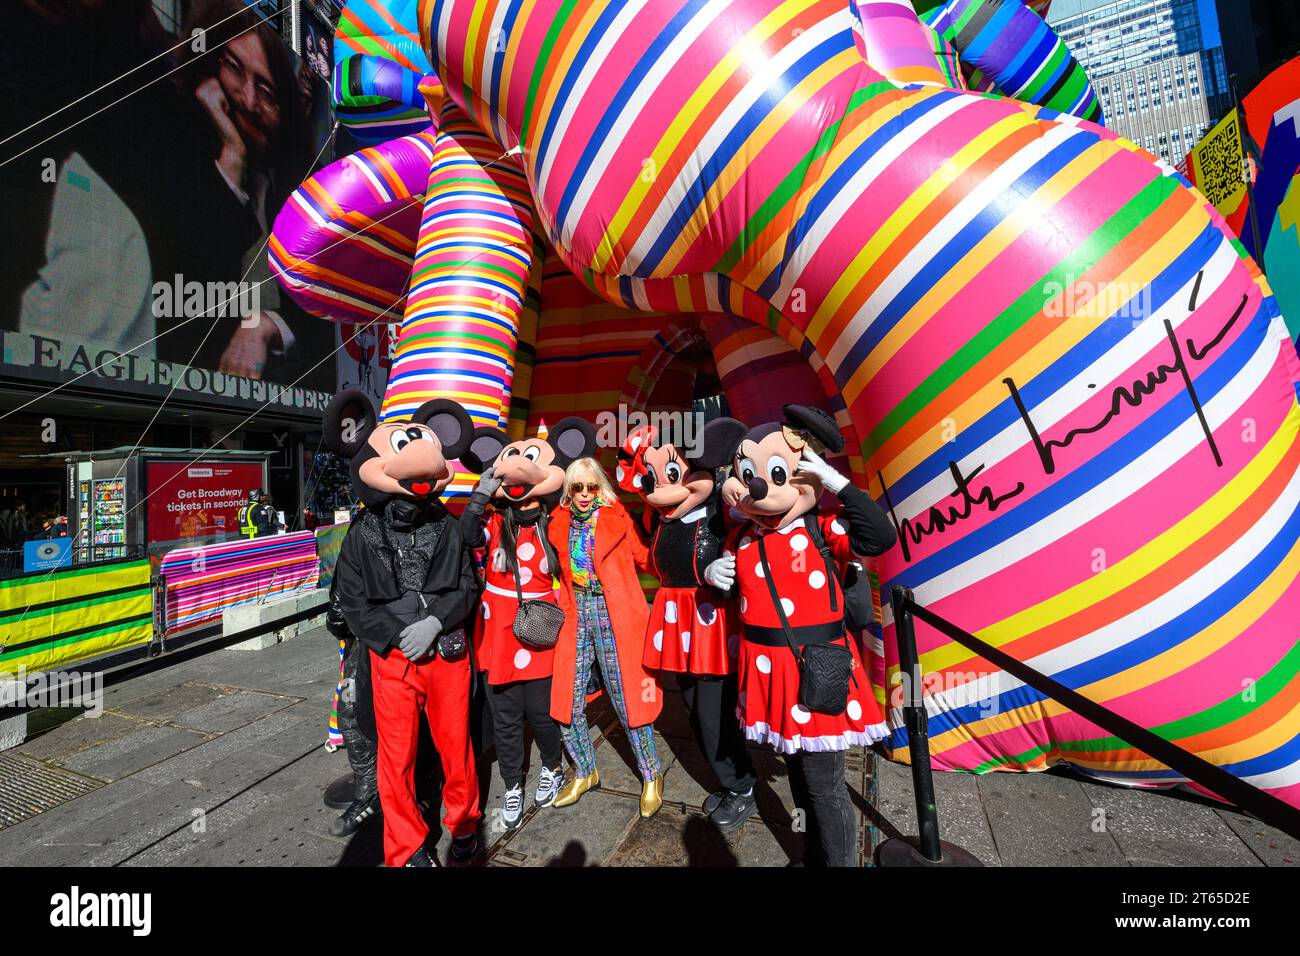 New York, USA. , . Argentinian conceptual pop artist Marta Minujín, 80, poses next to her 'Sculpture of Dreams' installation in Times Square along with characters representing Mickey and Minnie Mouse. The vibrant, large-scale, 16-piece inflatable in the artist's signature stripes is Minujín's first public sculpture in New York City in her sixty-year career, and is presented to coincide with the Jewish Museum's major survey exhibition of her work, Marta Minujín: Arte! Arte! Arte!, opening on November 17. Credit: Enrique Shore/Alamy Live News Stock Photo